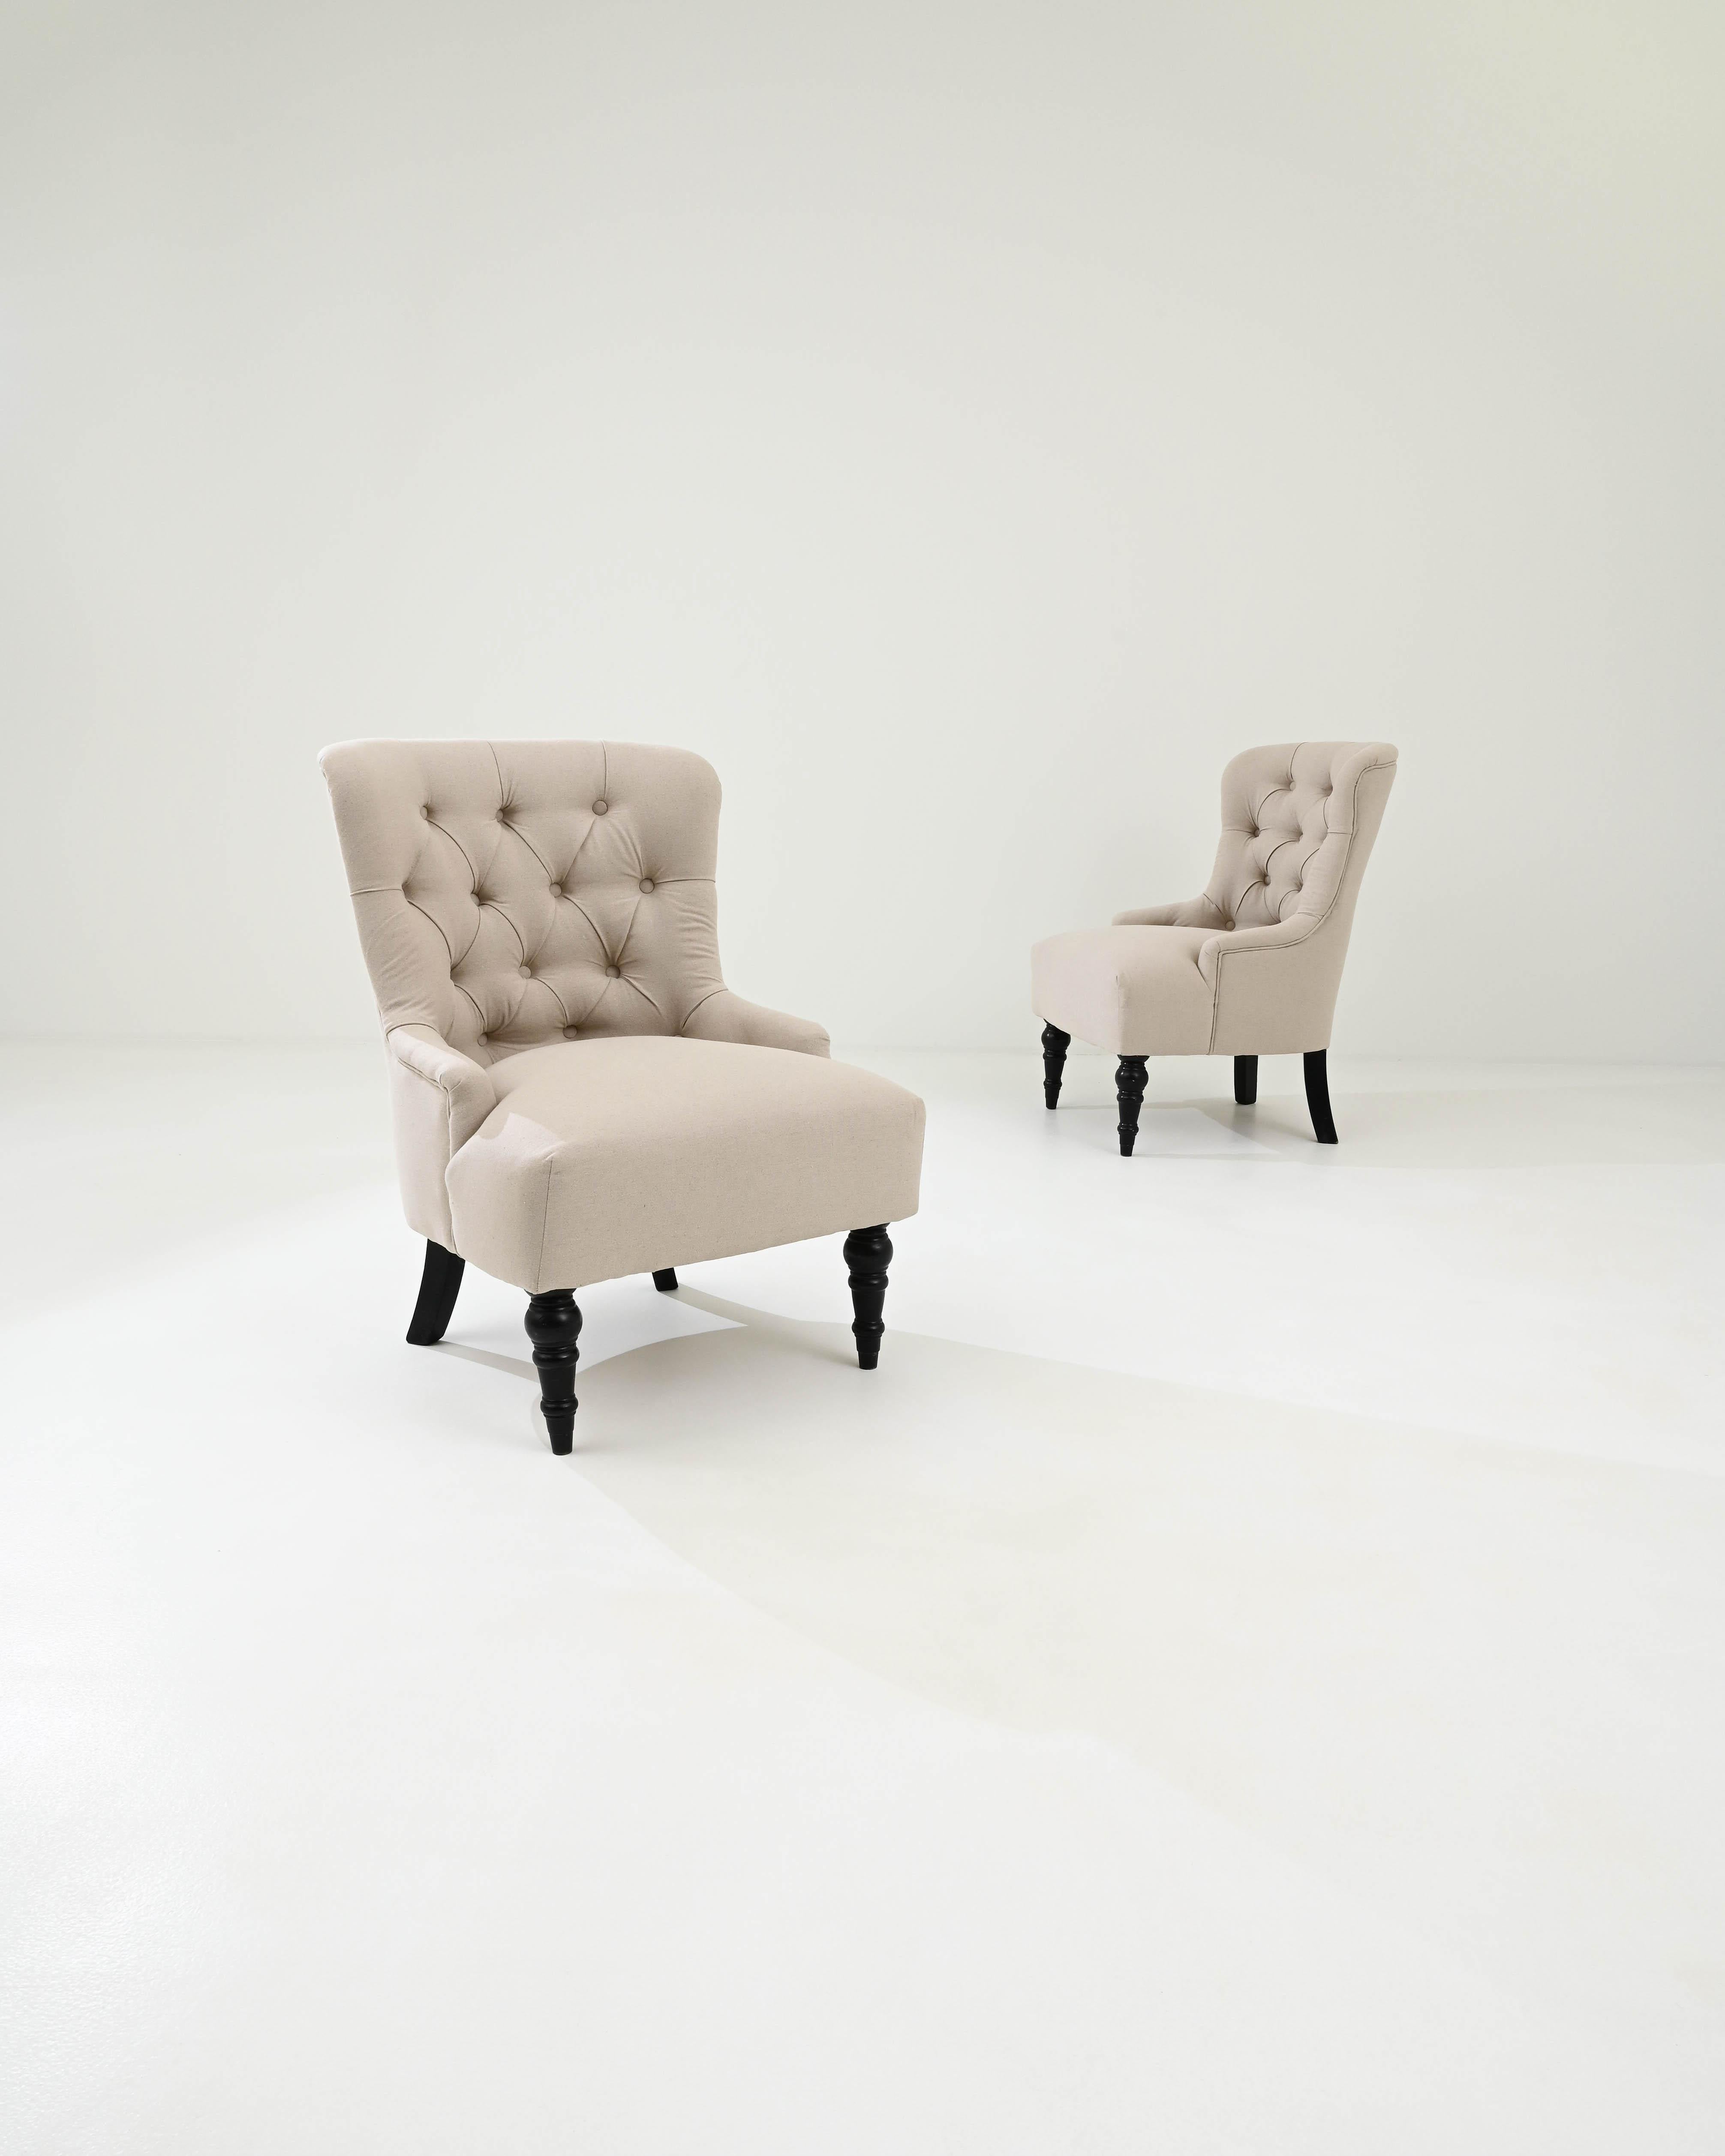 A pair of wooden upholstered armchairs created in 19th century France. Rotund and comfortable, yet also poised and dignified, this pair of chairs offers a distinguished place for a moment of rest. The freshly upholstered off-white seats and backs